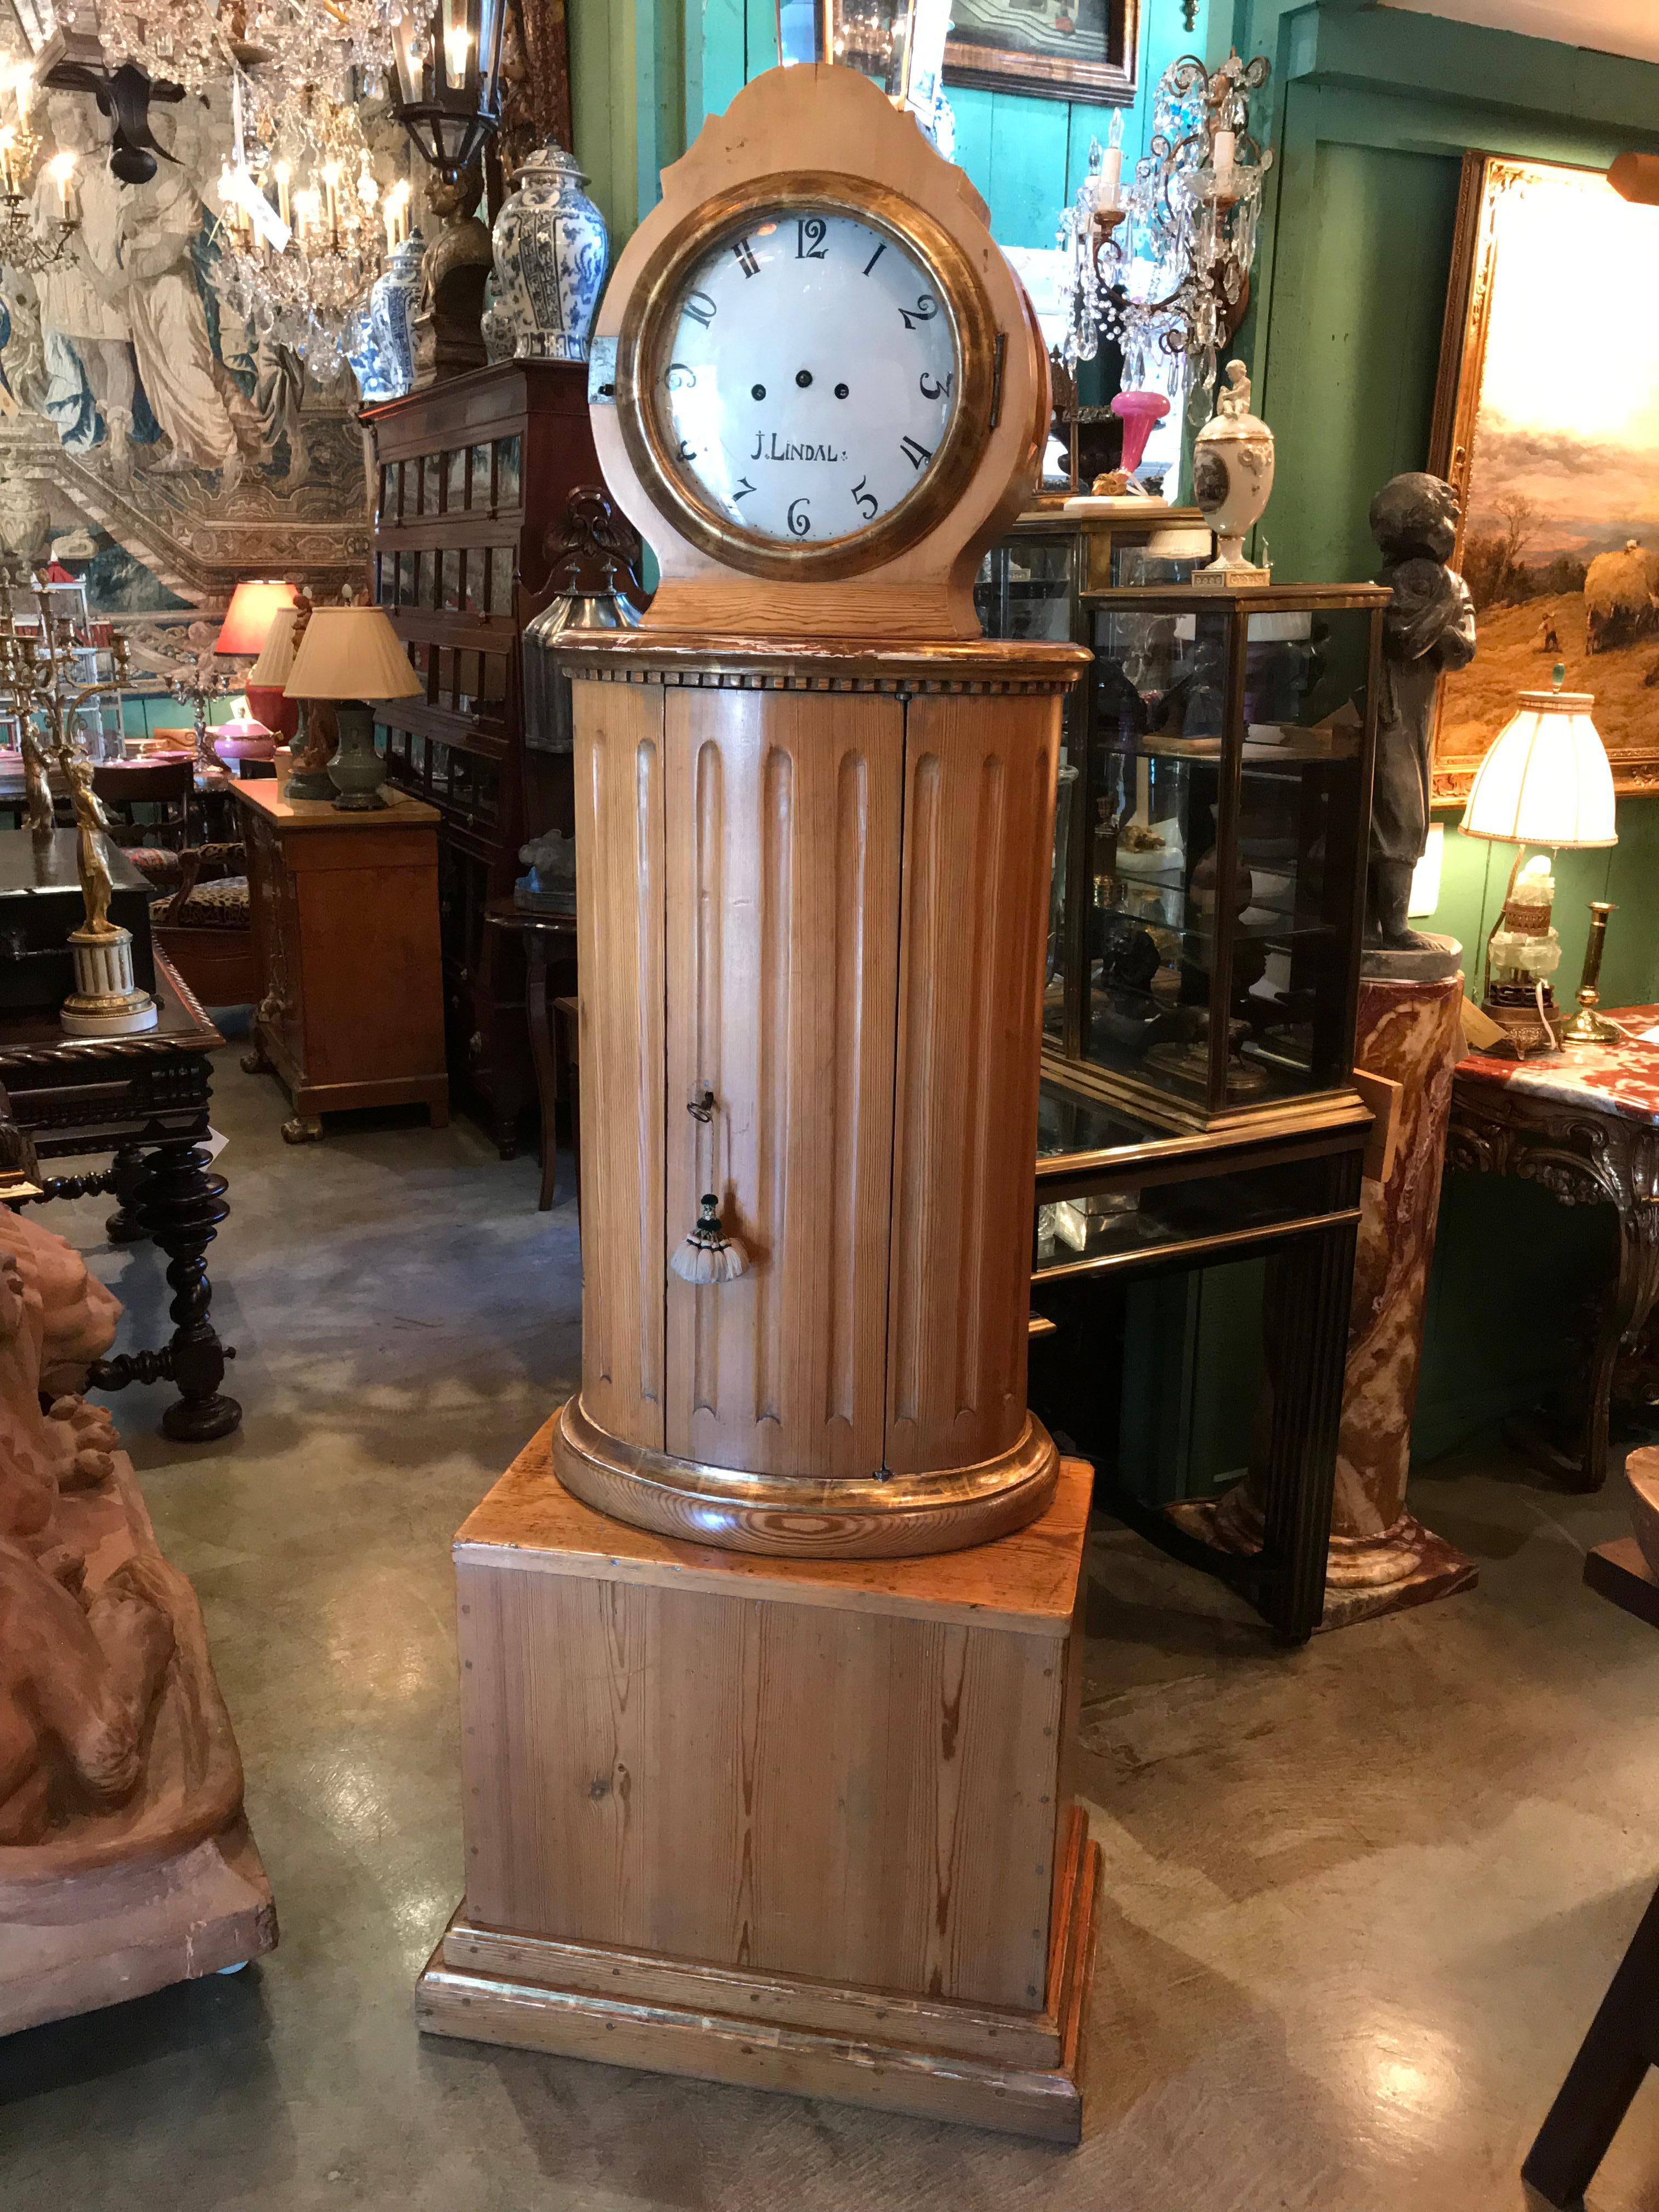 19th C. Swedish carved pine wood clock grandmother grandfather long case antique. Freestanding hand carved pine wood clock with all the original mechanics and hardware, weights rack hook wheels strike flirt Pendulum Mainsprings the Dial hour hand